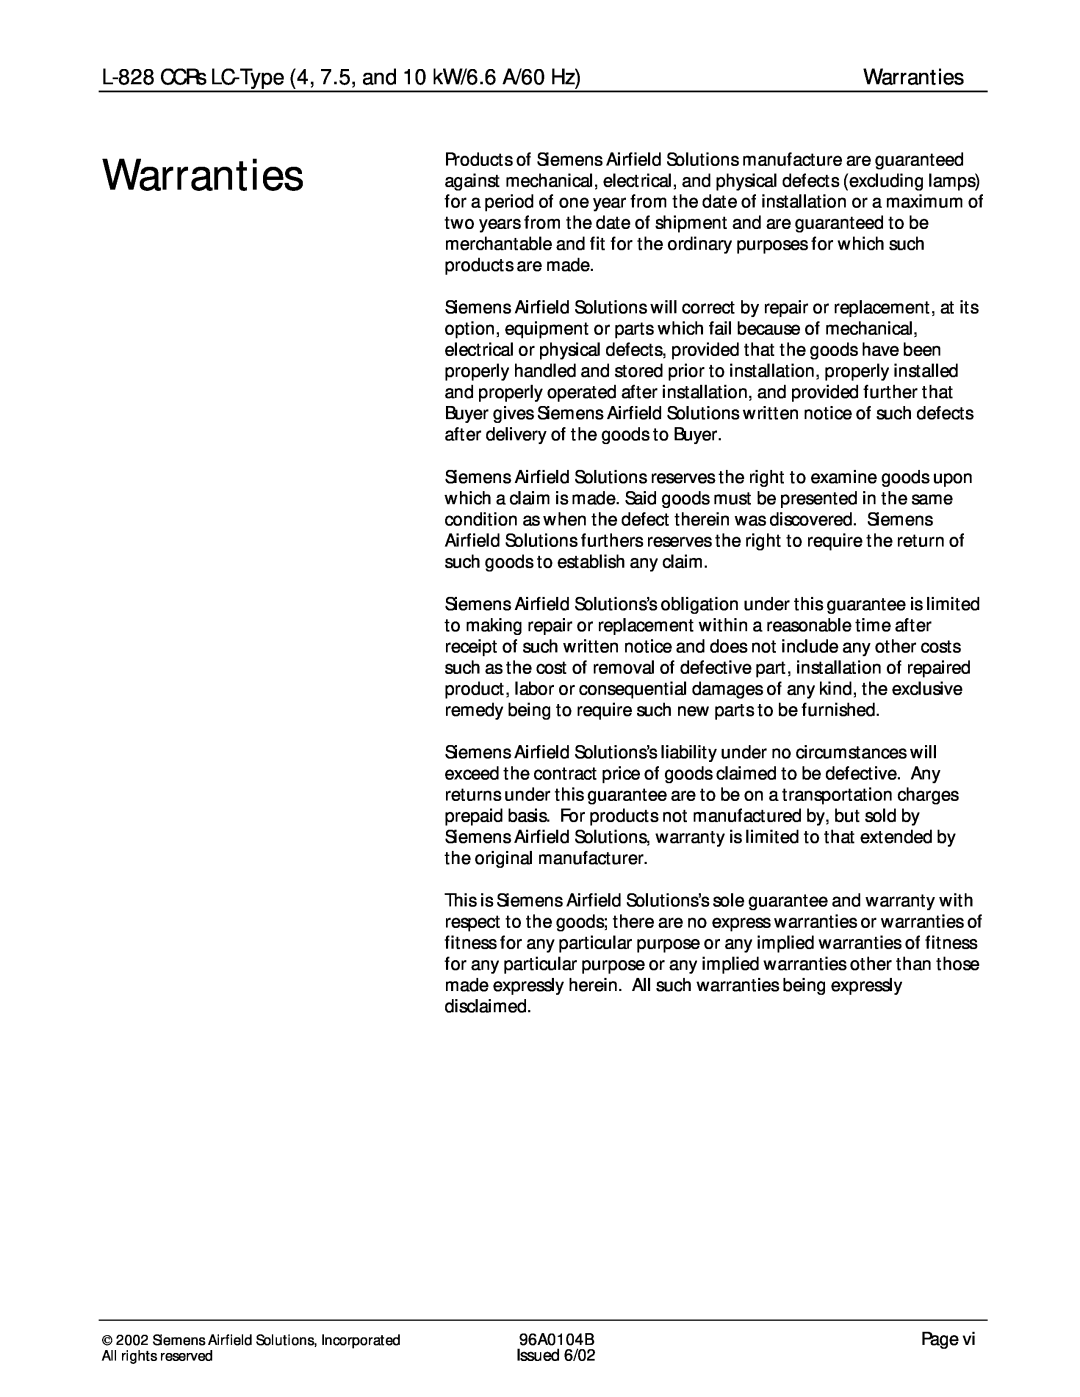 Siemens manual Warranties, L-828CCRs LC-Type4, 7.5, and 10 kW/6.6 A/60 Hz 